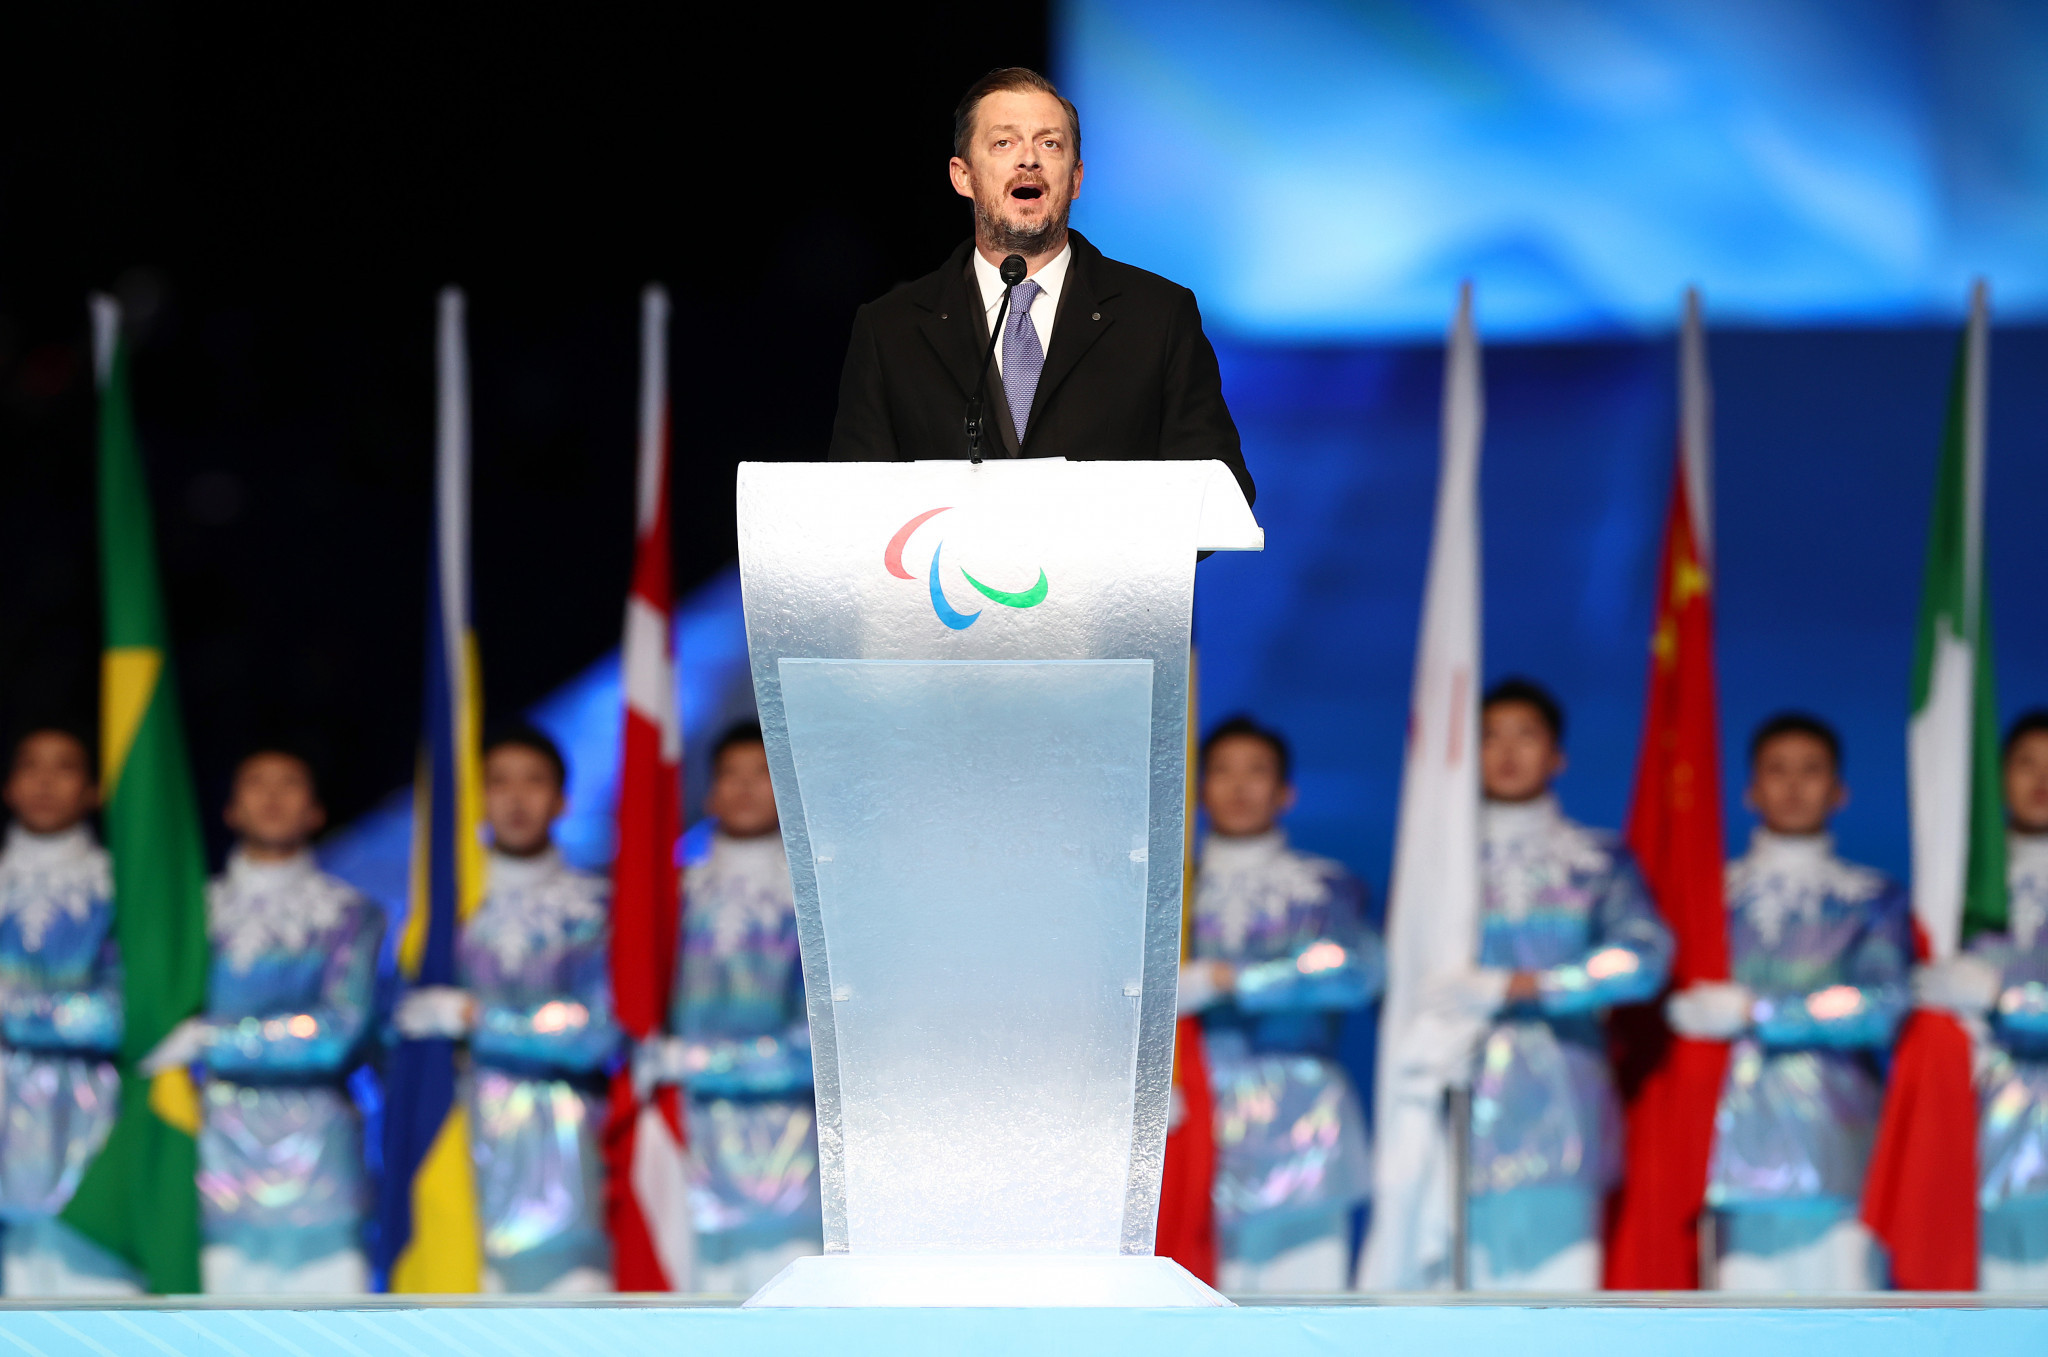 IPC President Andrew Parsons said he hoped COVID-19 would not affect Paris 2024 preparations ©Getty Images